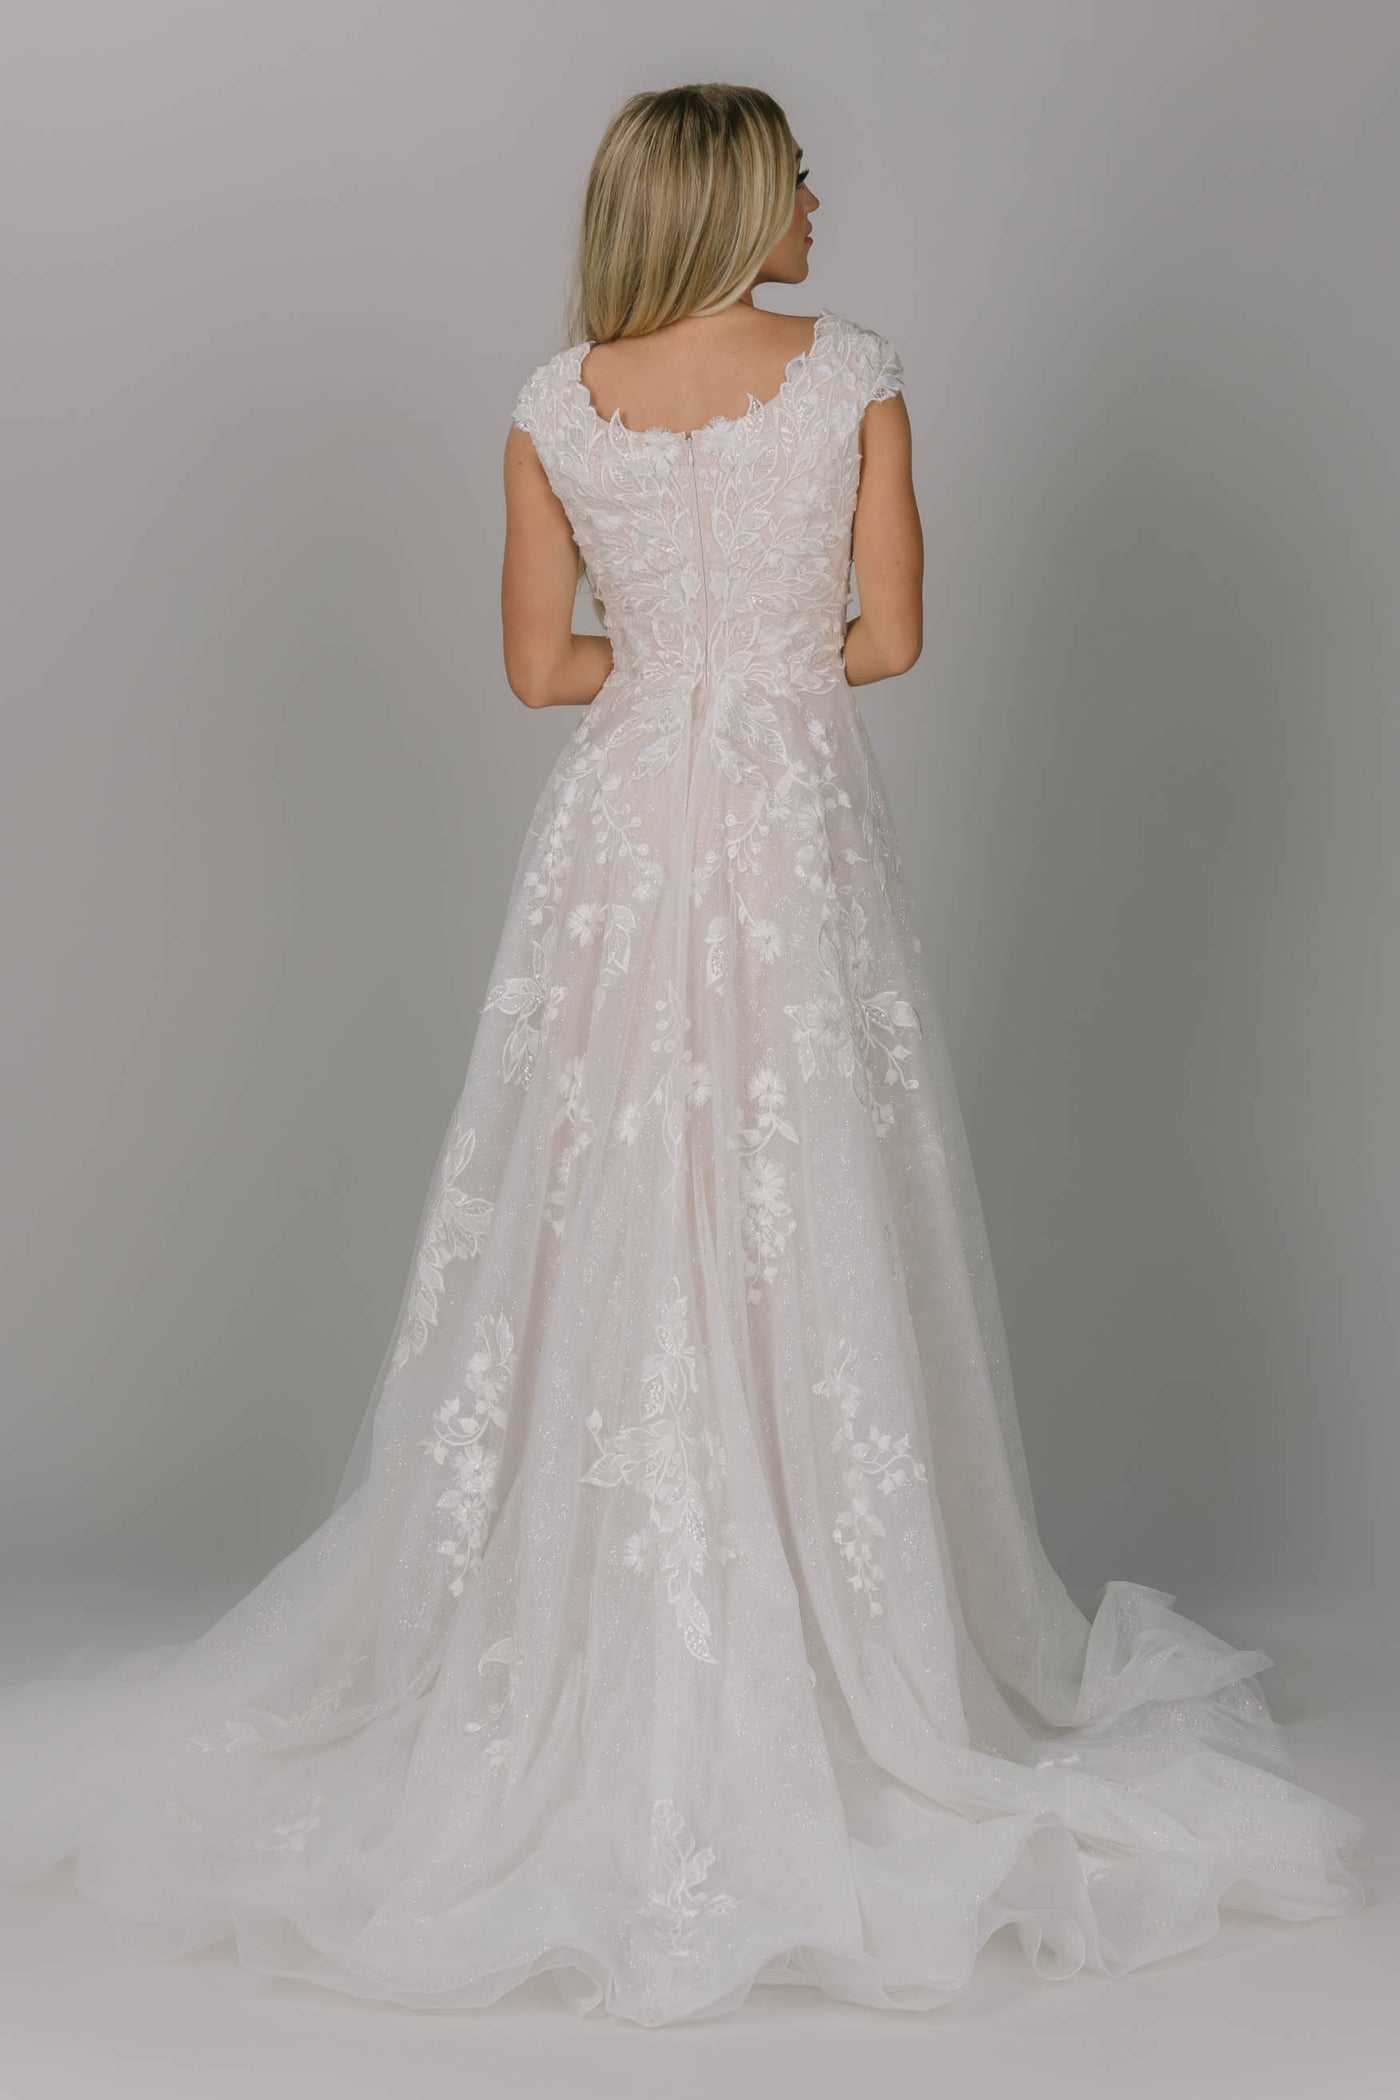 Glitter modest wedding dress. It has a scoop neckline and cap sleeves. The skirt has a soft sparkly glow. It has point leaf lace and a flowy train.